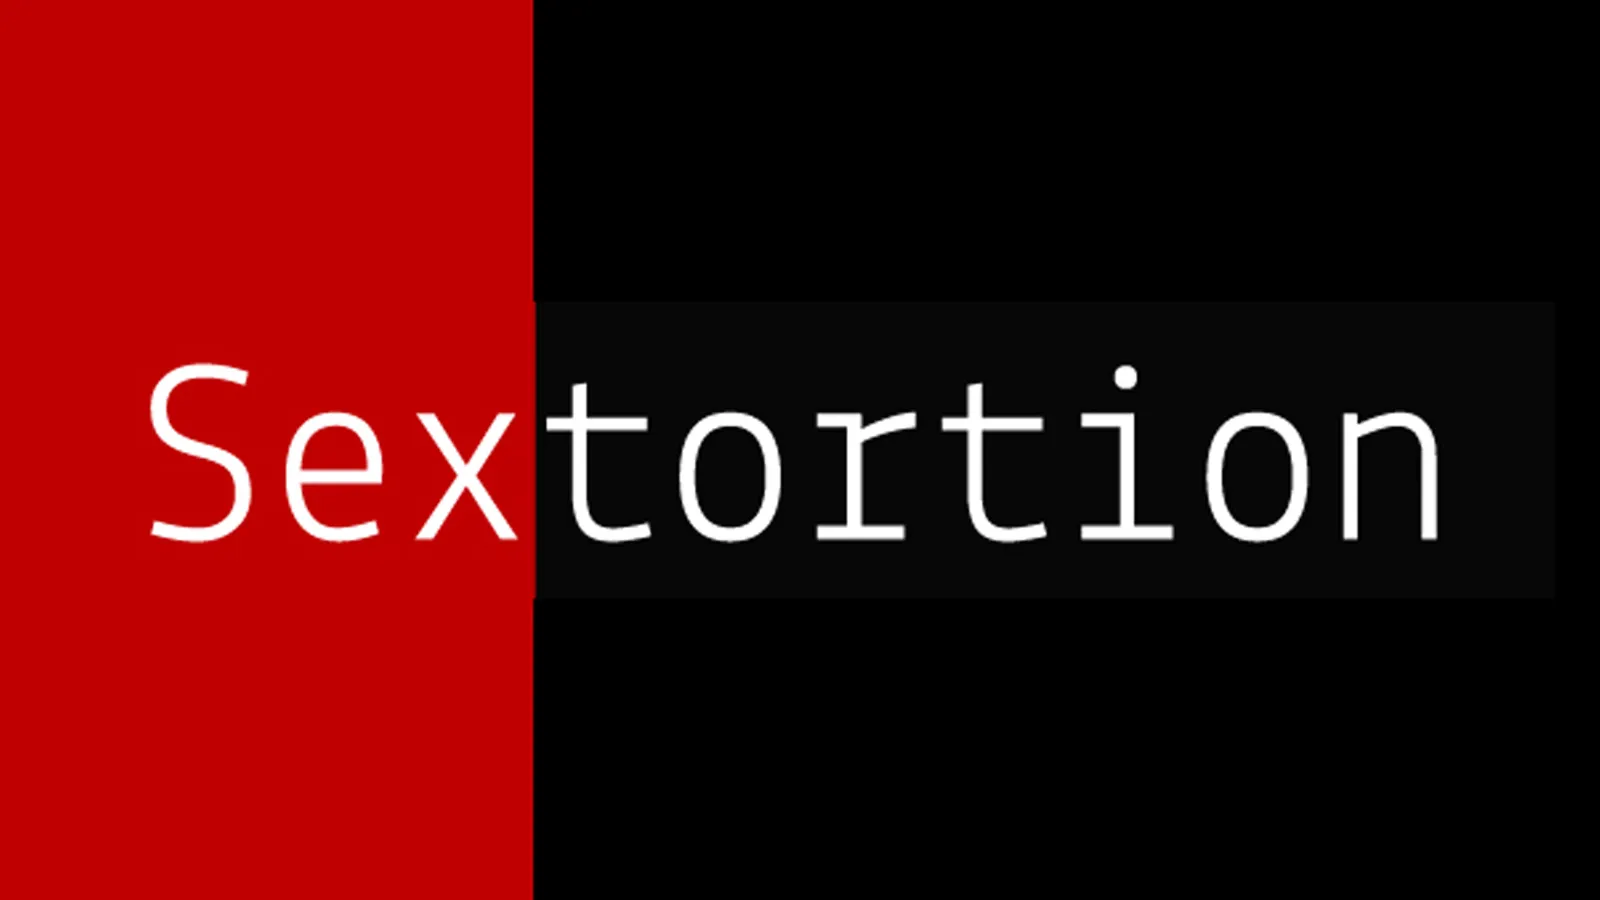 Sextortion Cybersecurity, teenagers, and remote sexual assault